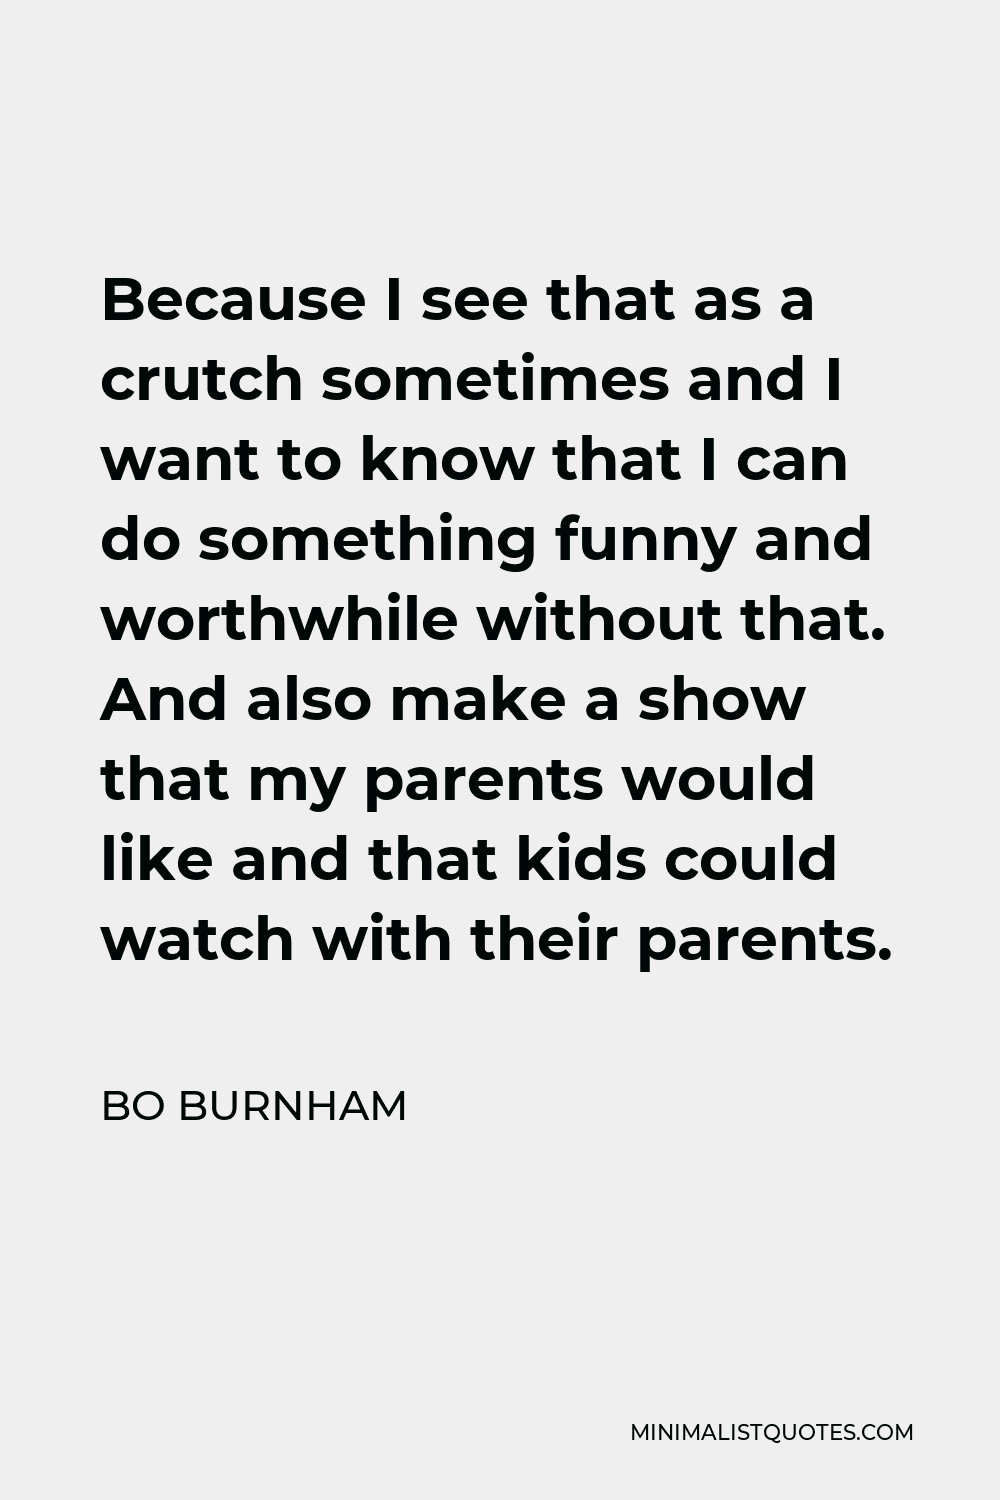 Bo Burnham Quote - Because I see that as a crutch sometimes and I want to know that I can do something funny and worthwhile without that. And also make a show that my parents would like and that kids could watch with their parents.